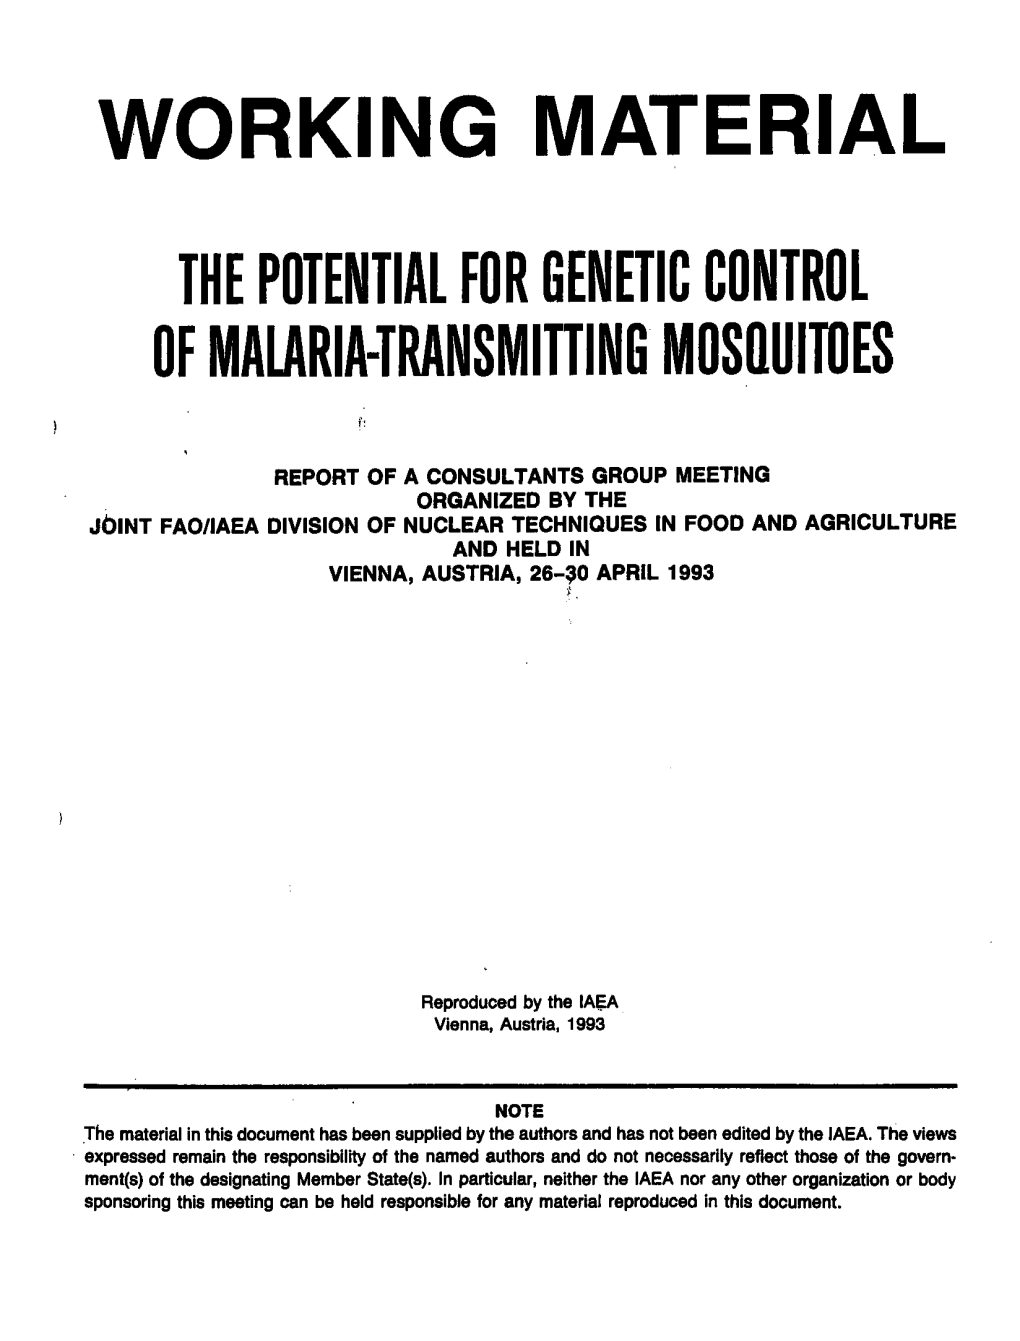 The Potential for Genetic Control of Malaria-Transmitting Mosquitoes